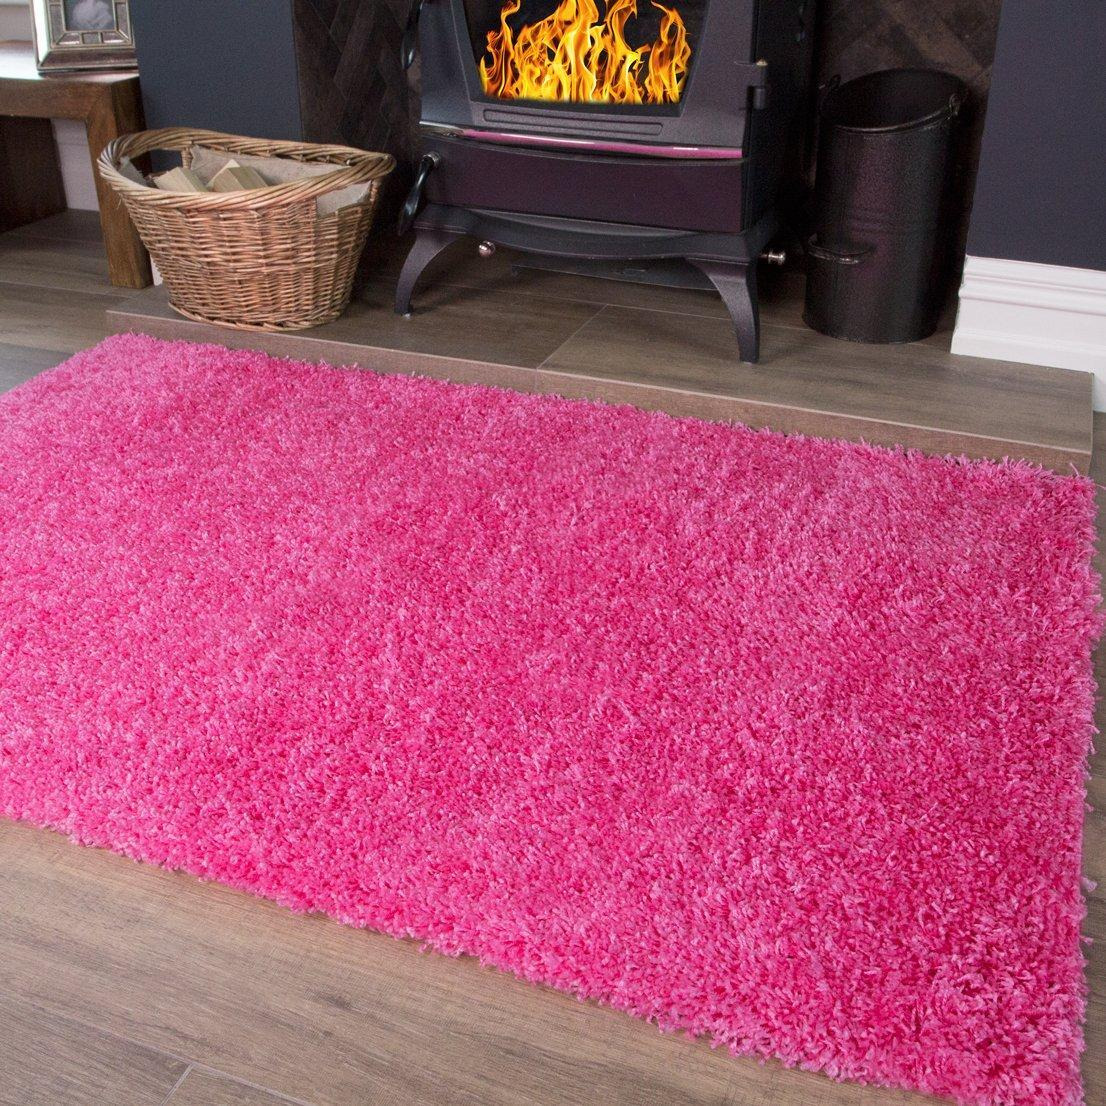 Bright Pink Soft Value Shaggy Living Area Rug - image 1